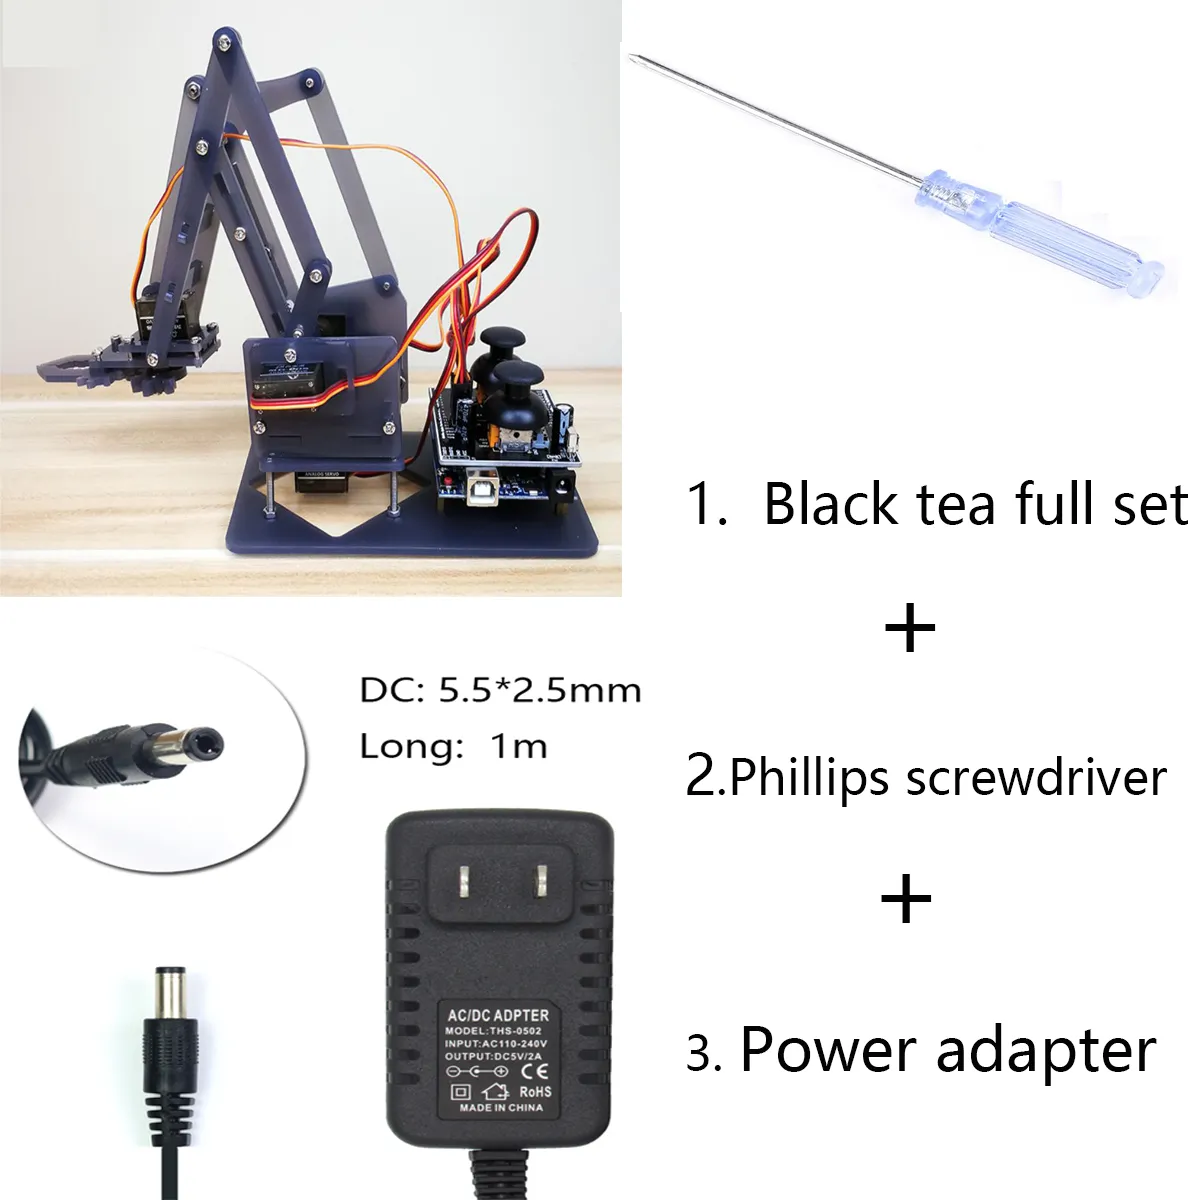 Robotic Arm Plank 4 DOF Robot Manipulator Claw SG90 MG90S Robot FOR UNO Board Programmable Toys Diy Kits Splicing Rudder Gifts